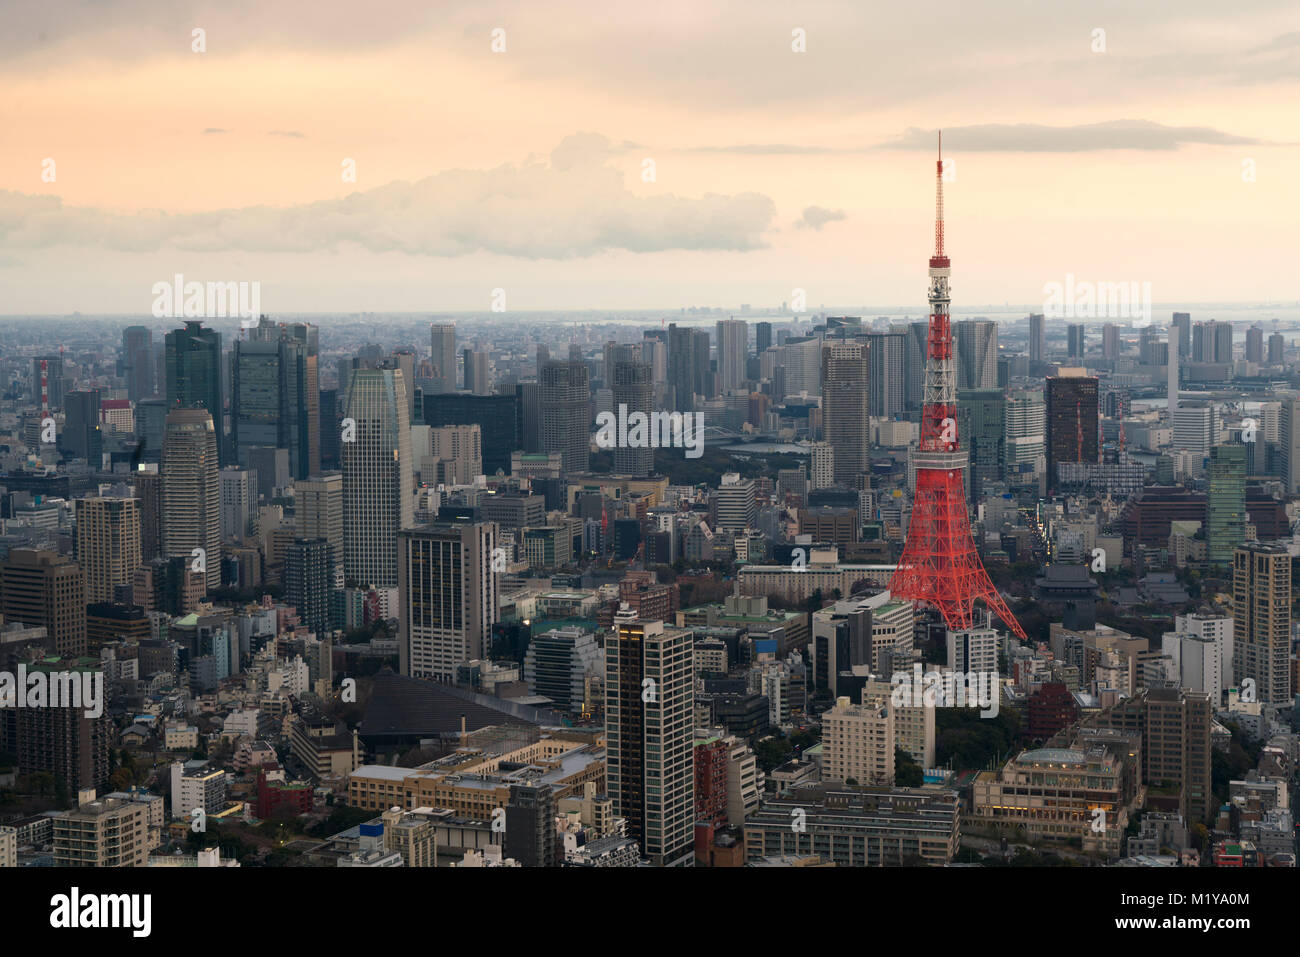 Tokyo city view with Tokyo Tower at evening in Japan. Skyscrapers in downton city. Stock Photo